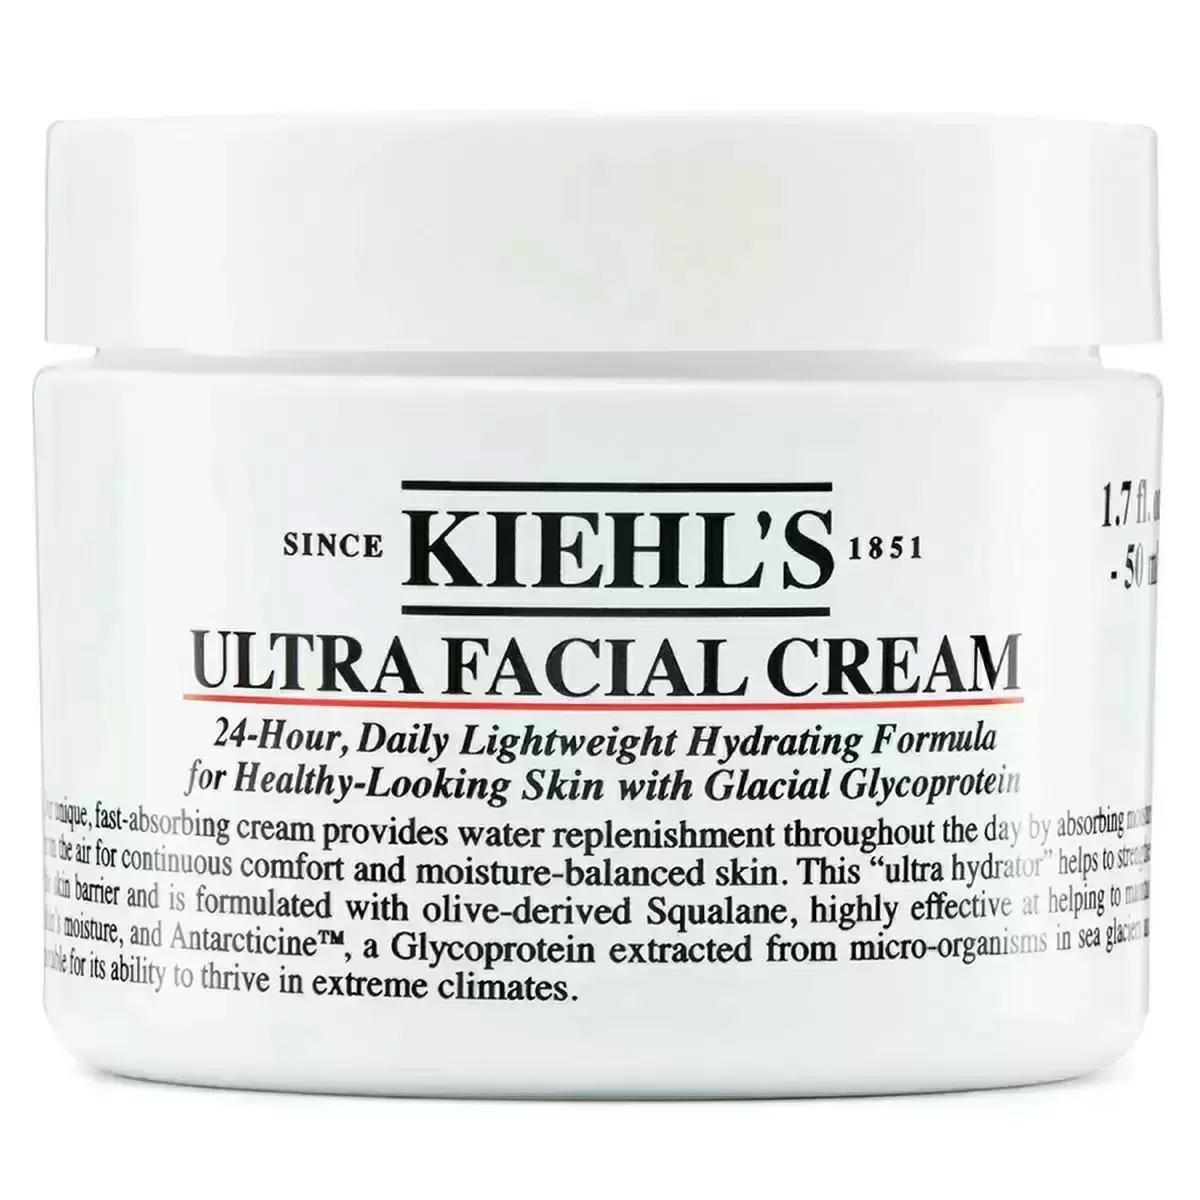 Kiehls Sitewide $35 Off Coupon with Free Samples